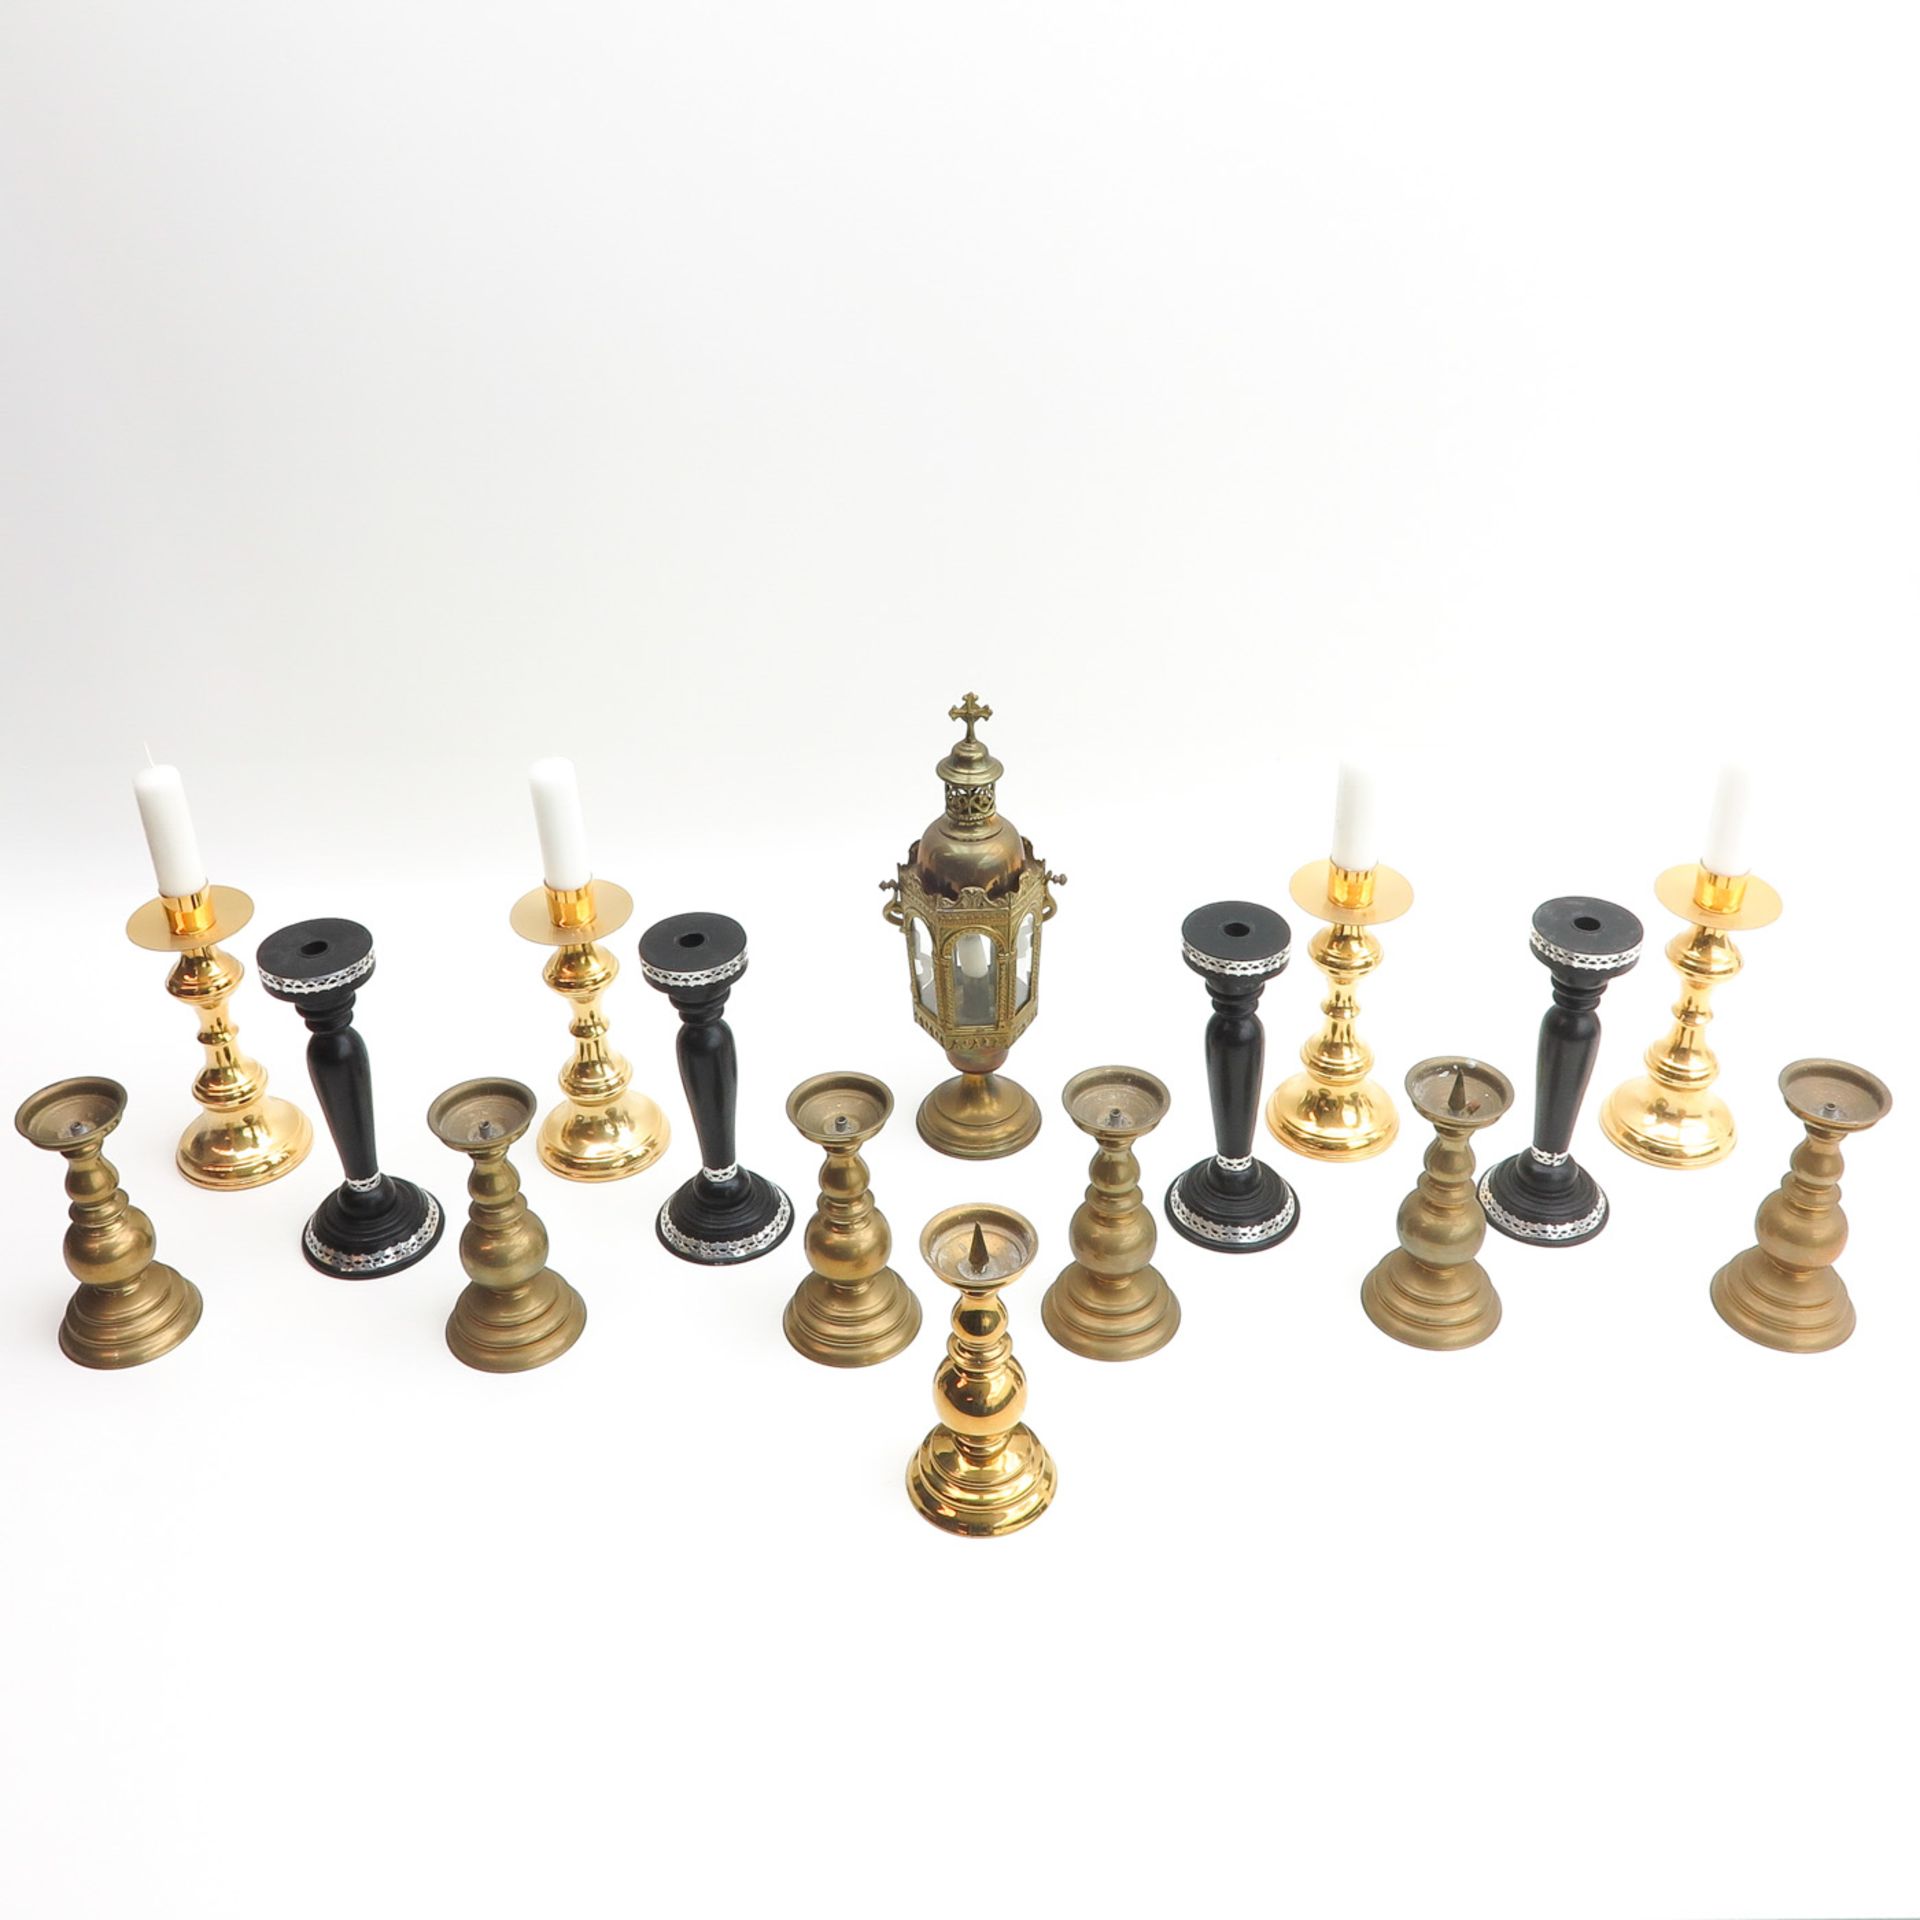 A Diverse Collection of Altar Candlesticks